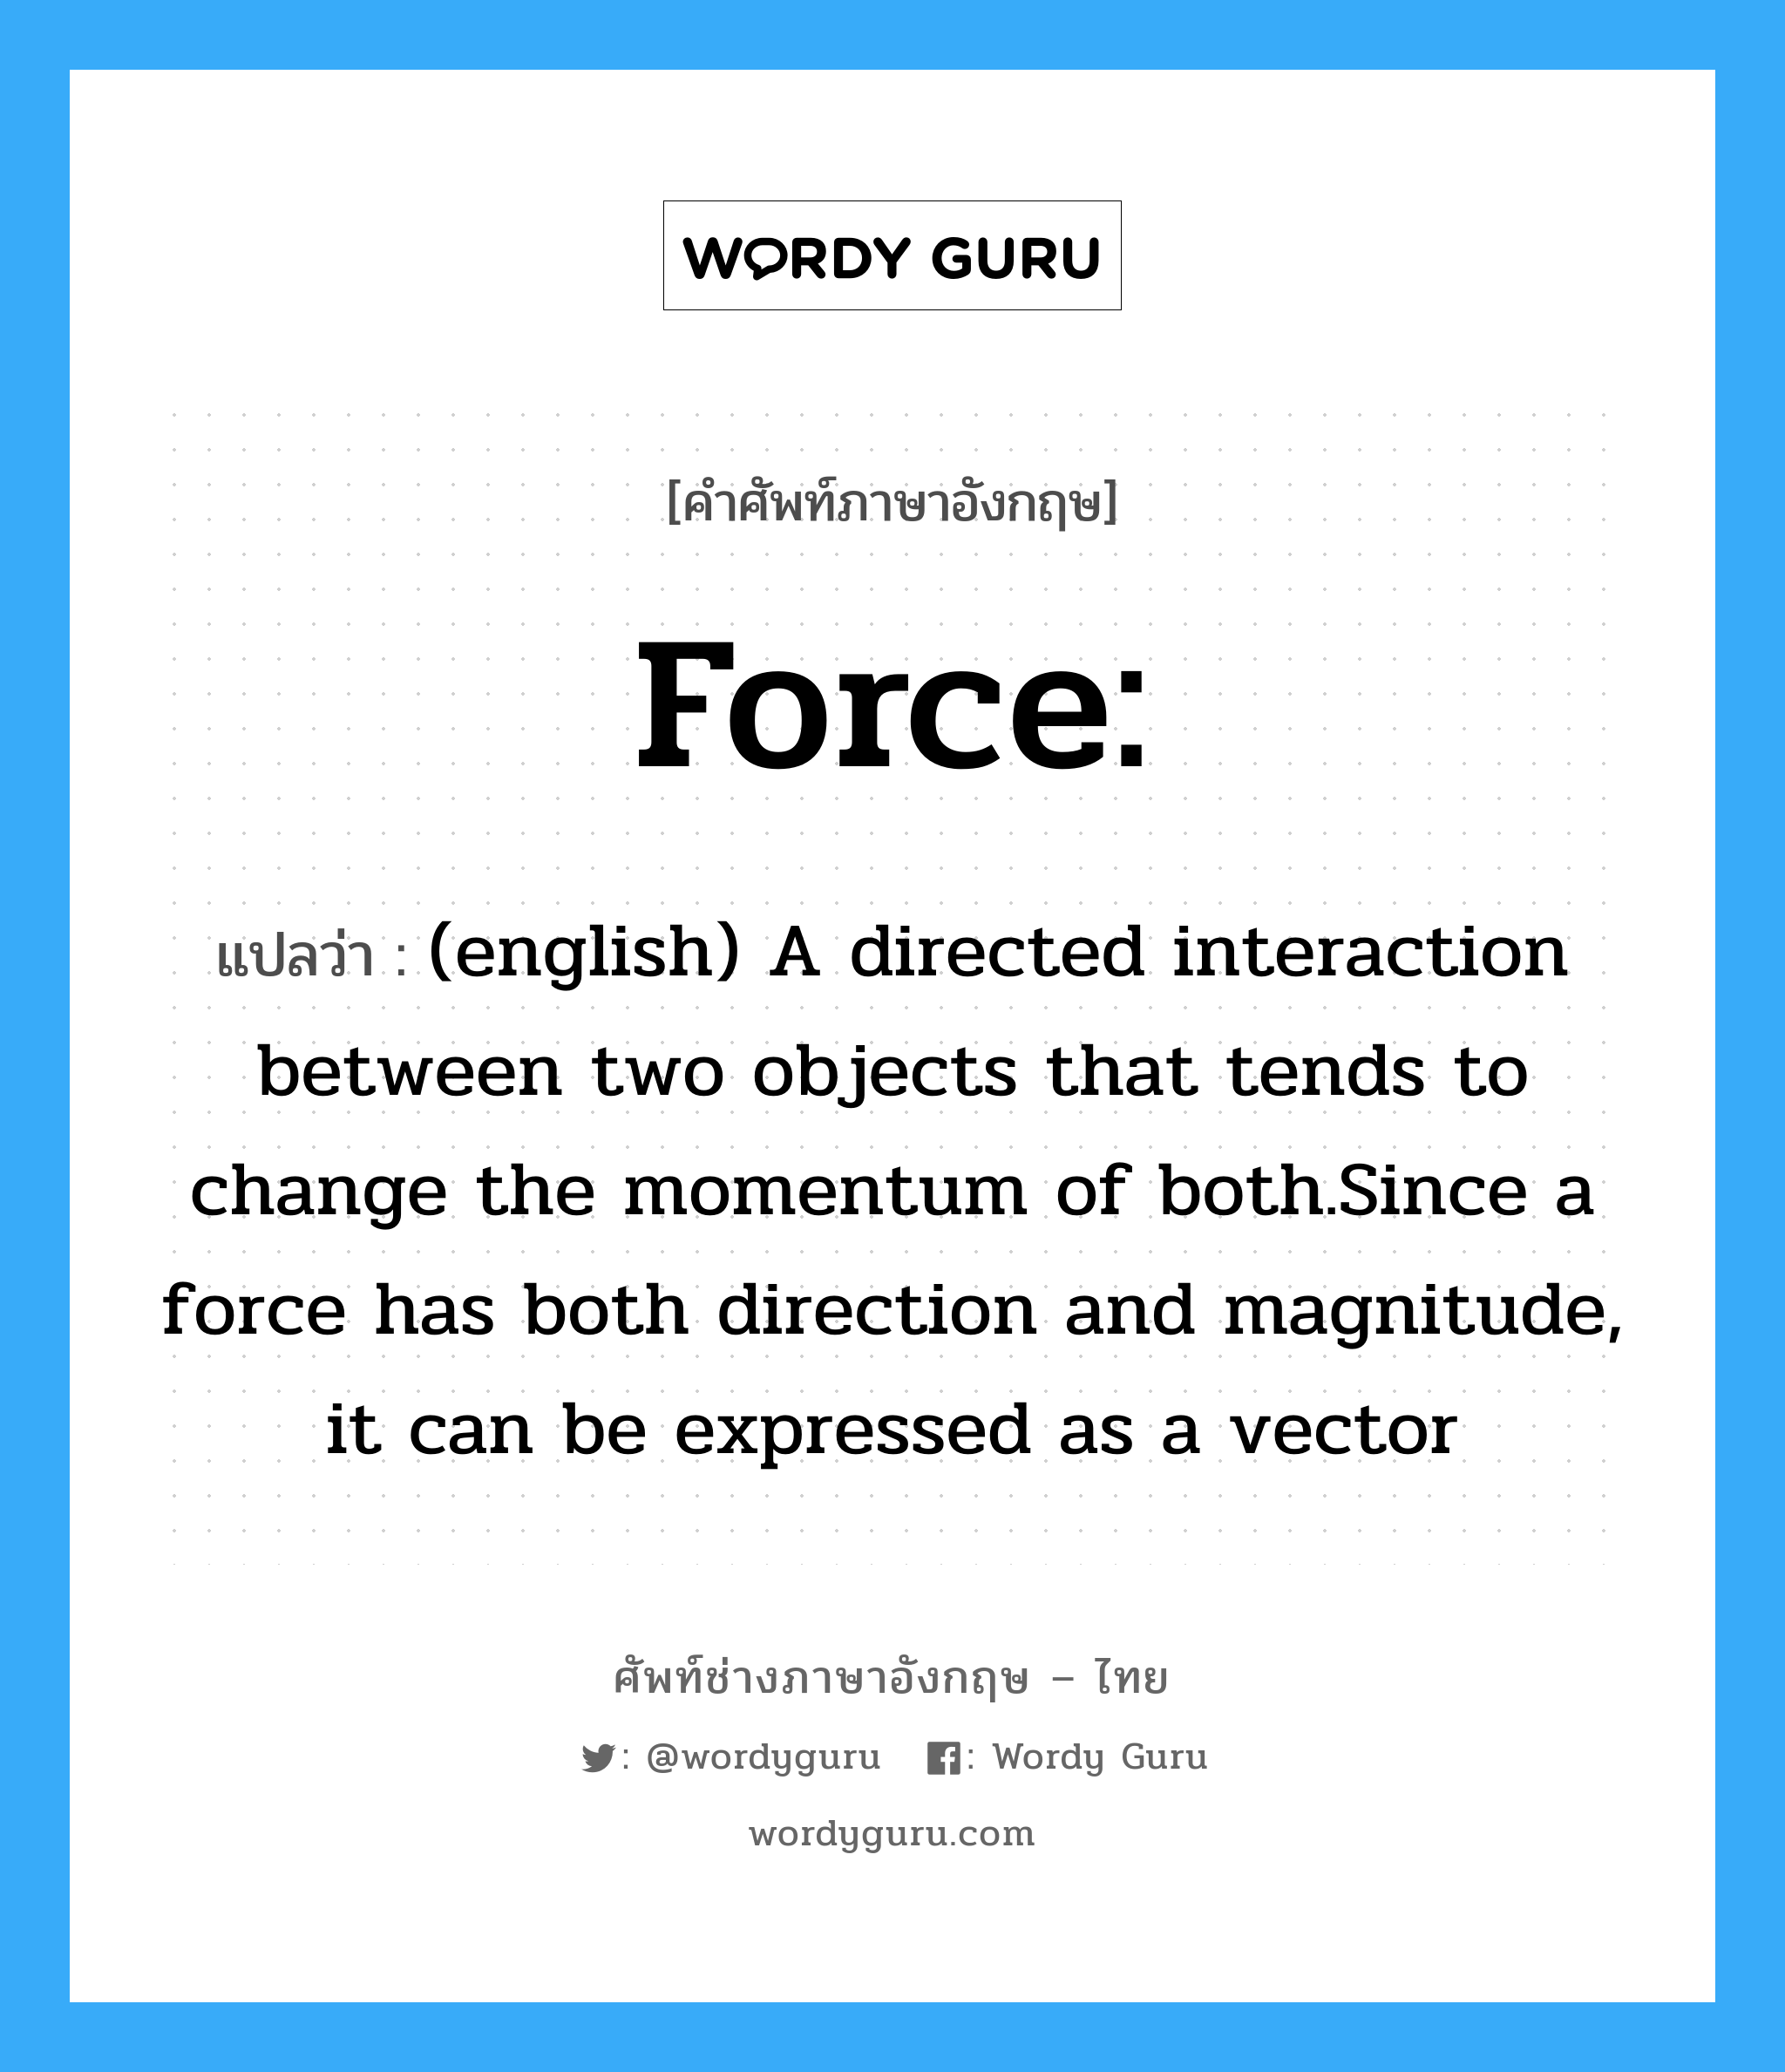 (english) A directed interaction between two objects that tends to change the momentum of both.Since a force has both direction and magnitude, it can be expressed as a vector ภาษาอังกฤษ?, คำศัพท์ช่างภาษาอังกฤษ - ไทย (english) A directed interaction between two objects that tends to change the momentum of both.Since a force has both direction and magnitude, it can be expressed as a vector คำศัพท์ภาษาอังกฤษ (english) A directed interaction between two objects that tends to change the momentum of both.Since a force has both direction and magnitude, it can be expressed as a vector แปลว่า Force: